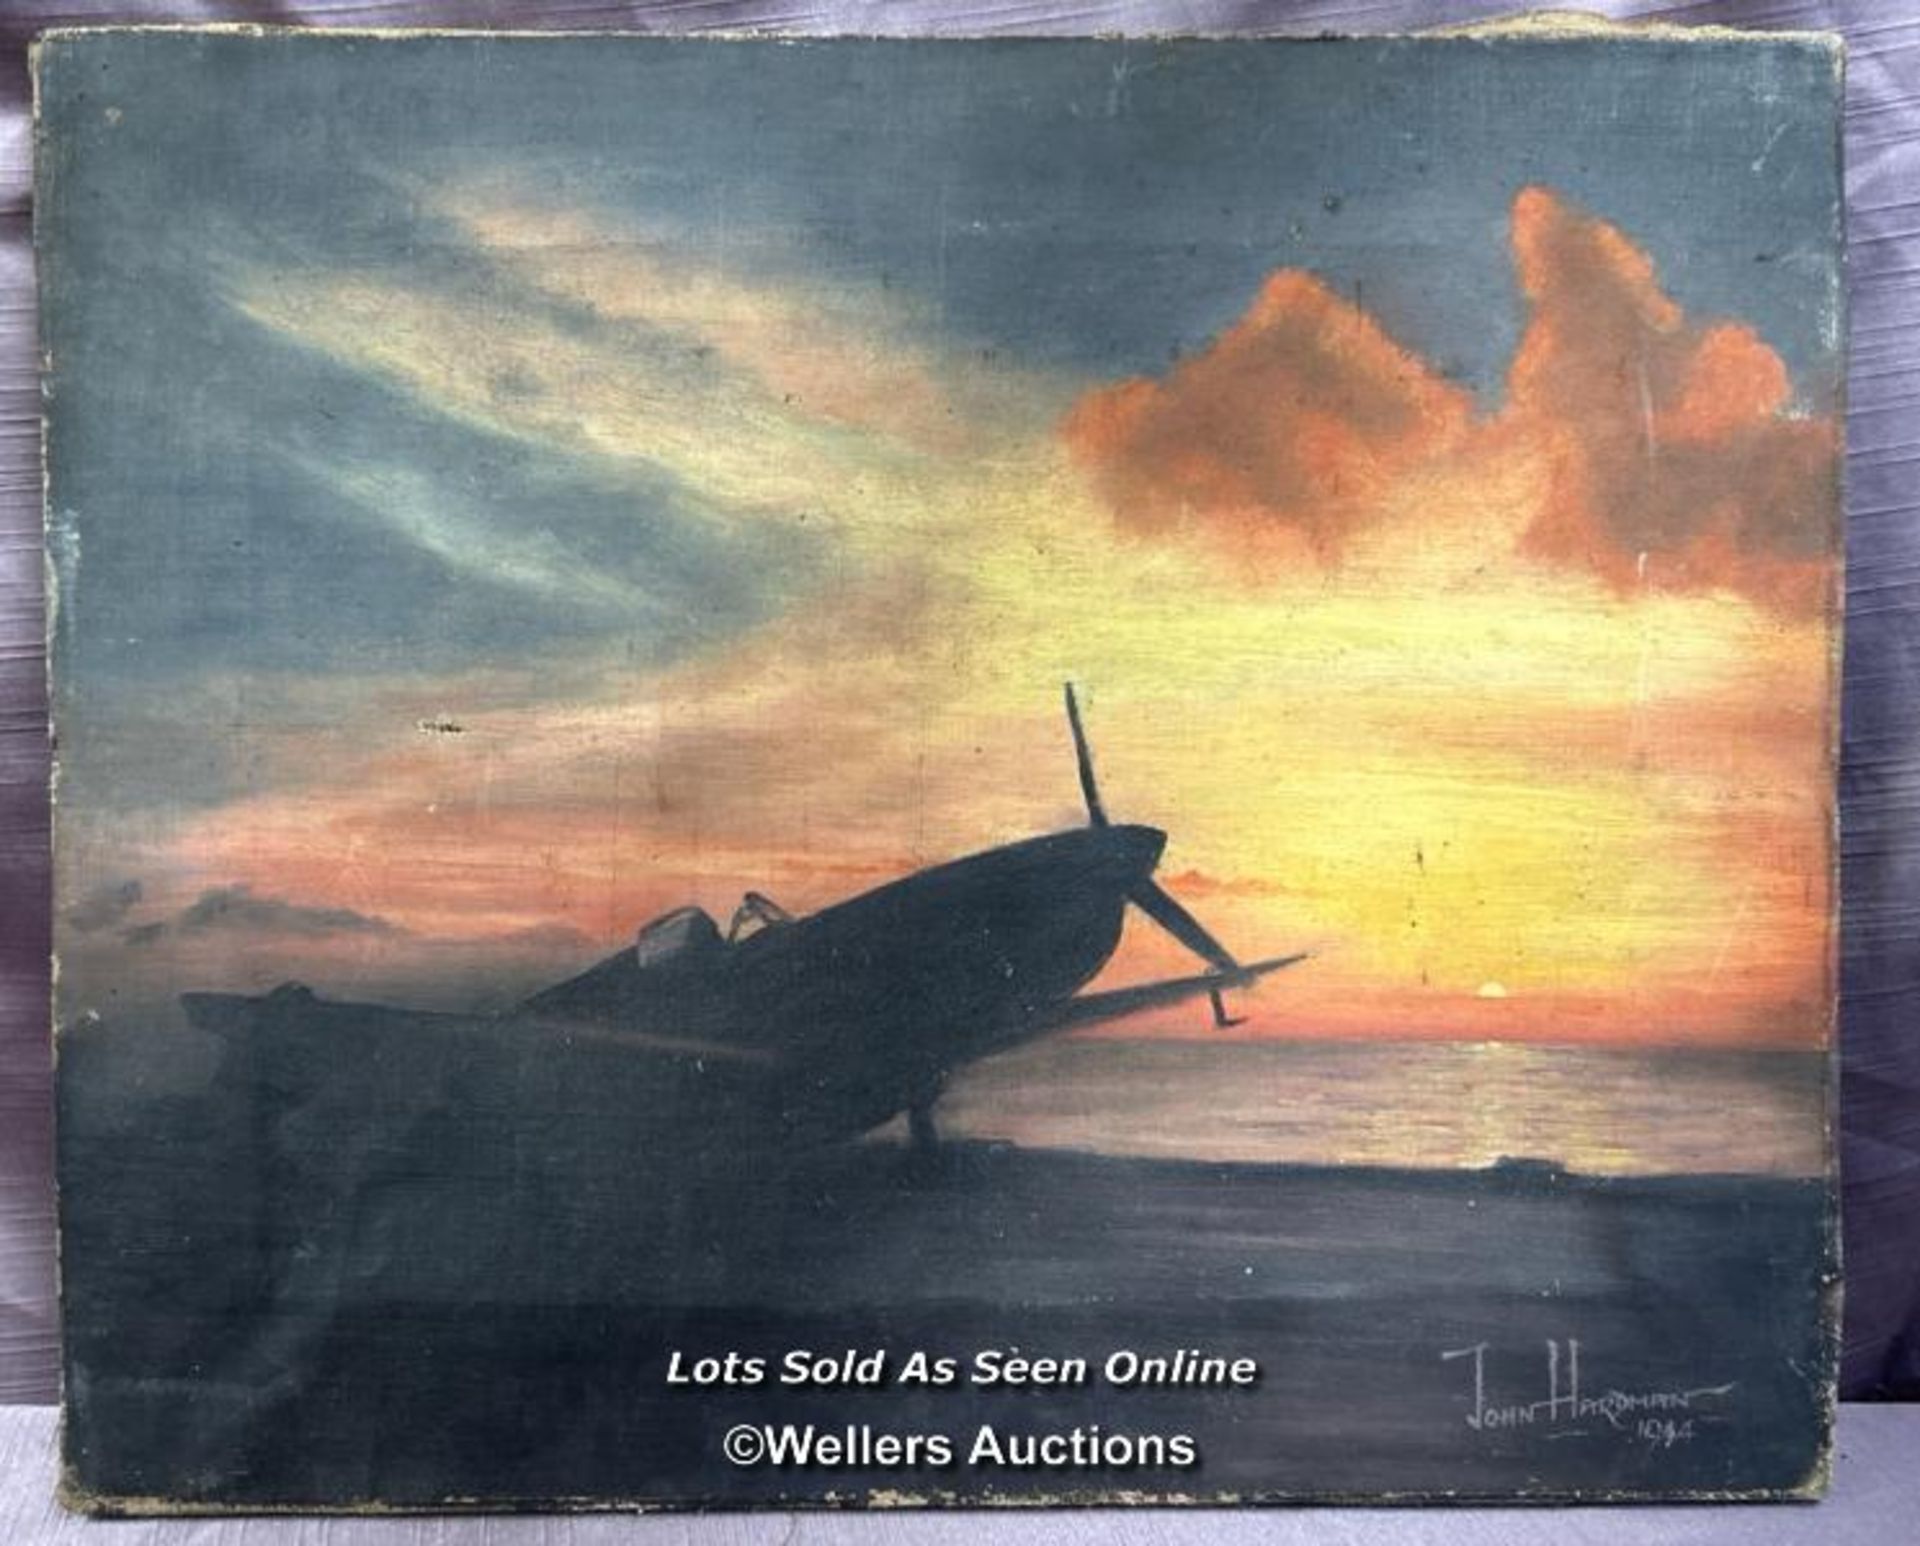 OIL ON CANVAS DEPICTING SILHOUETTE OF SPITFIRE, BY JOHN HARDMAN IN 1944 (L.A.C 1297151), 30.5 X 37CM